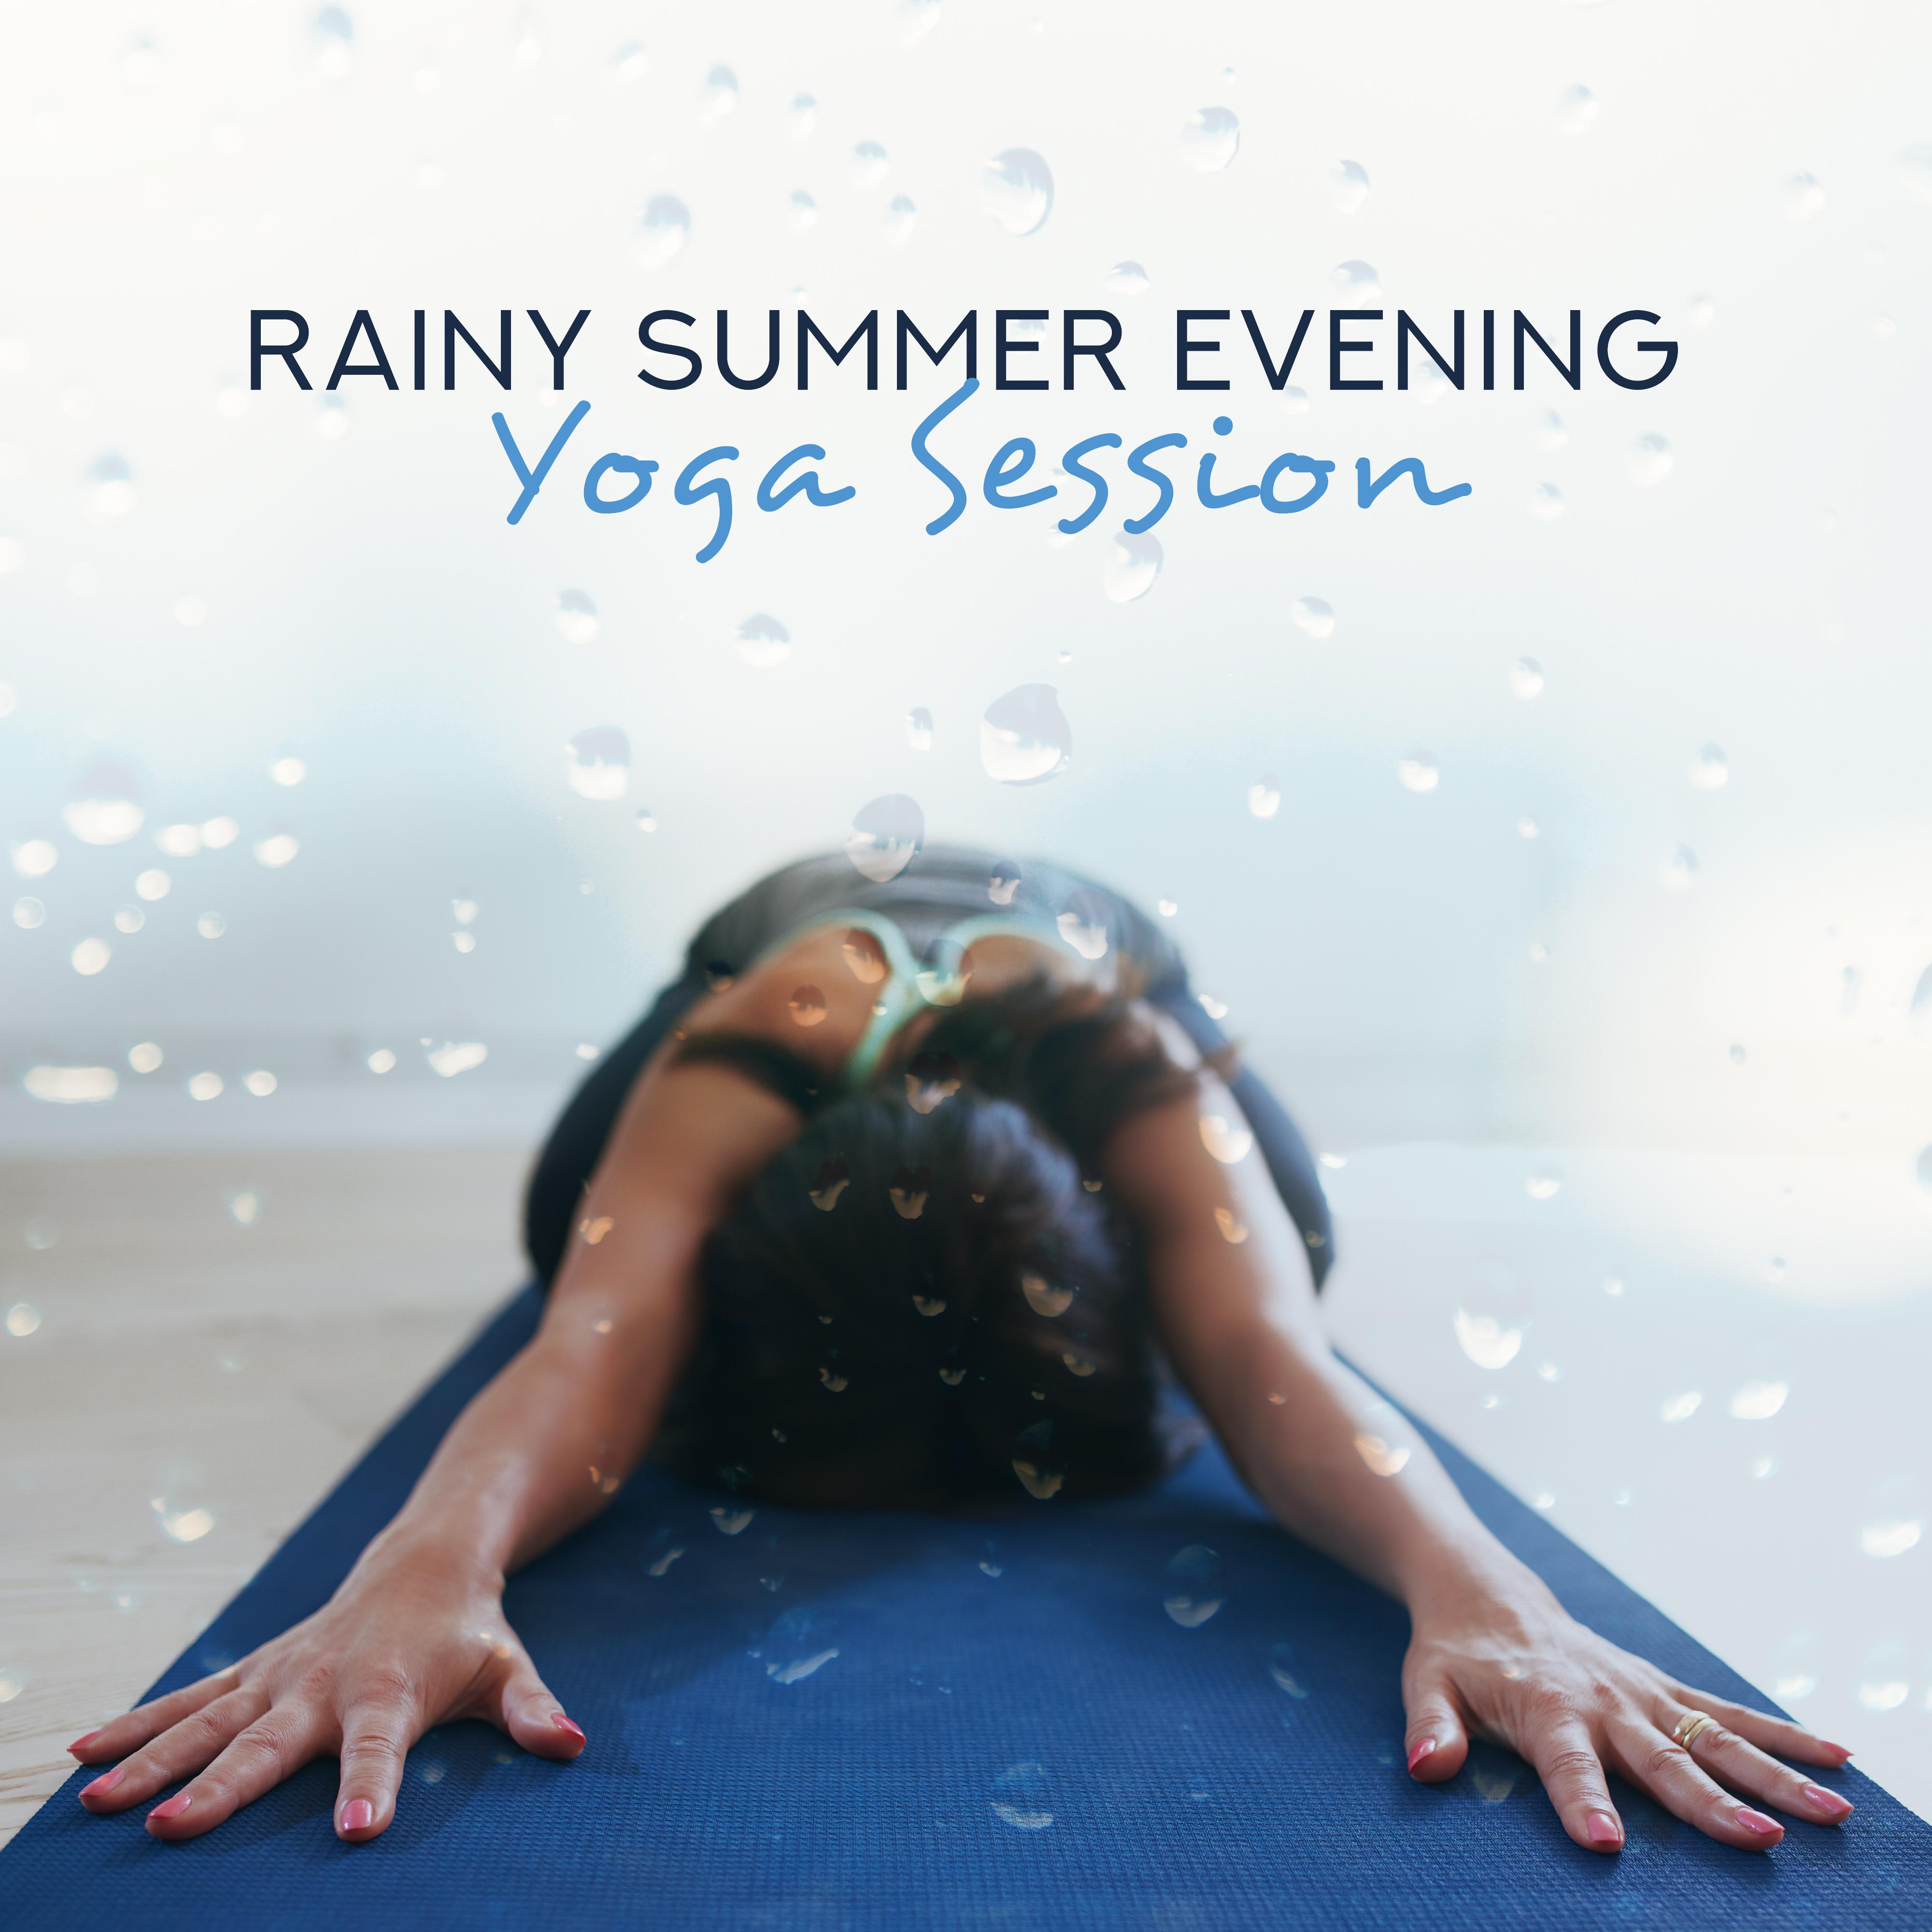 Rainy Summer Evening Yoga Session: 2019 New Age Music for Best Meditation & Relaxation, Increase Your Inner Energy, Balance Body & Mind, Chakra Healing